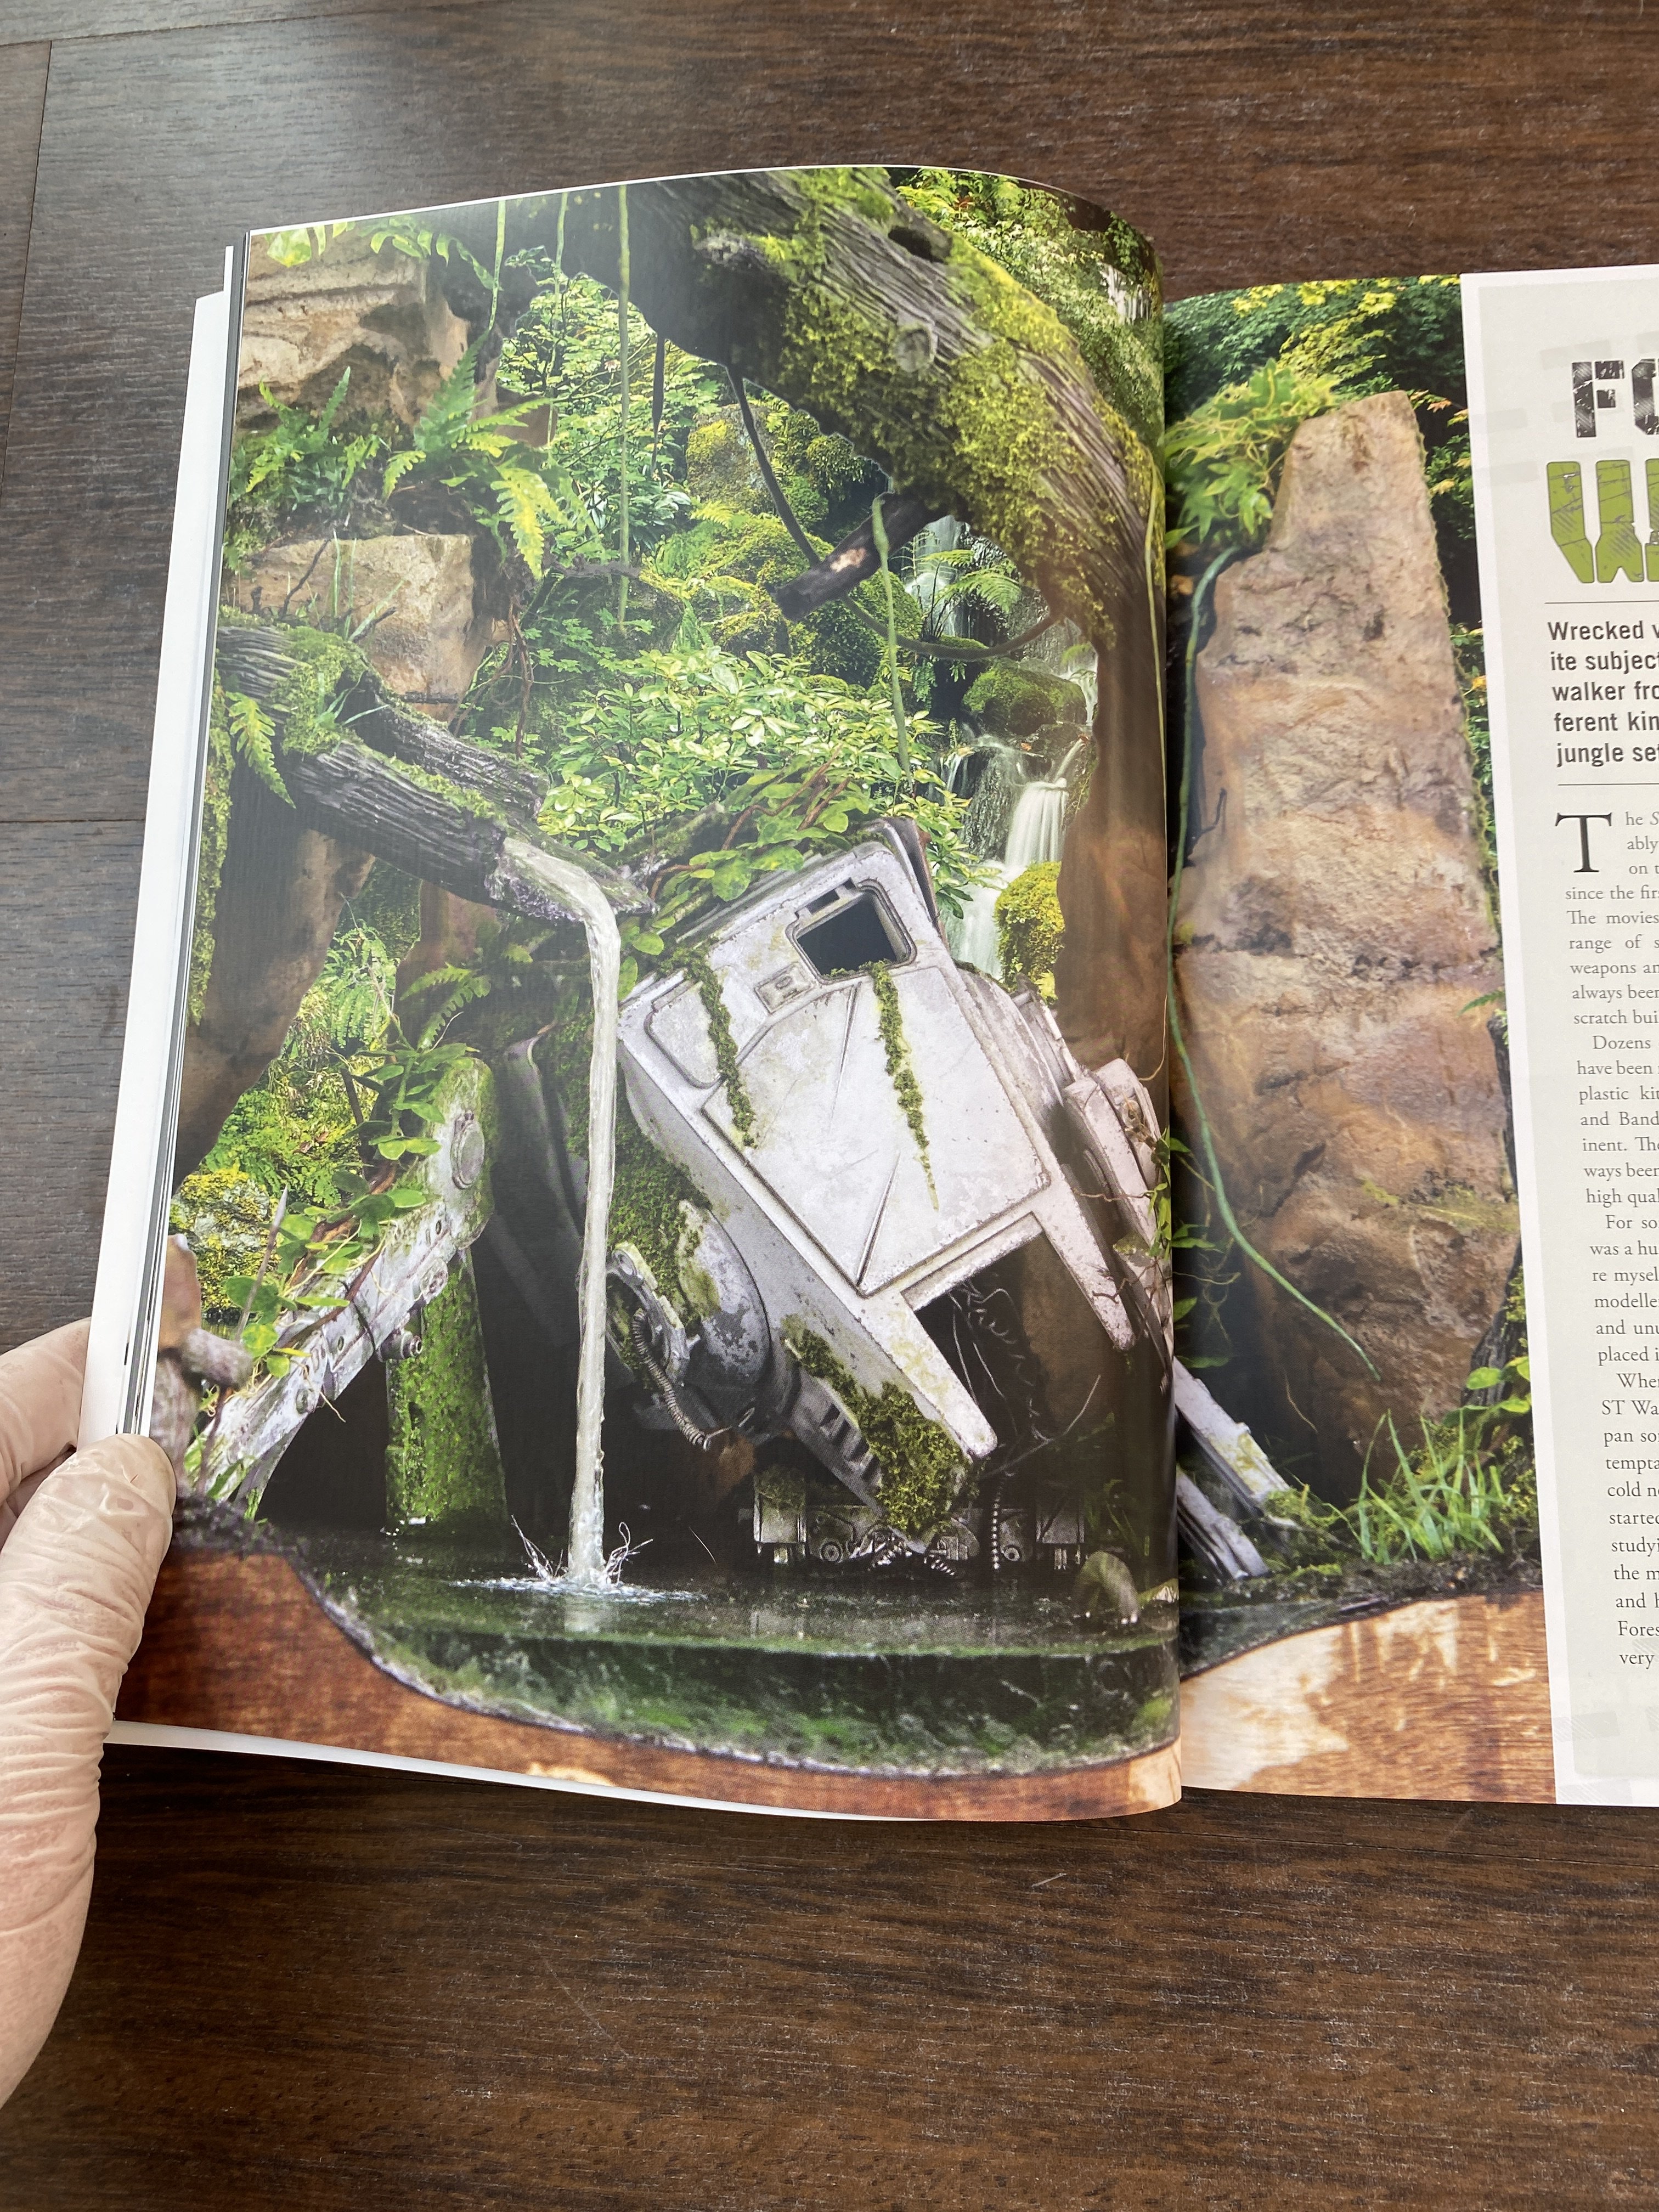 The Modelling News: Review: World of Dioramas by Per Olav Lund: Vol I